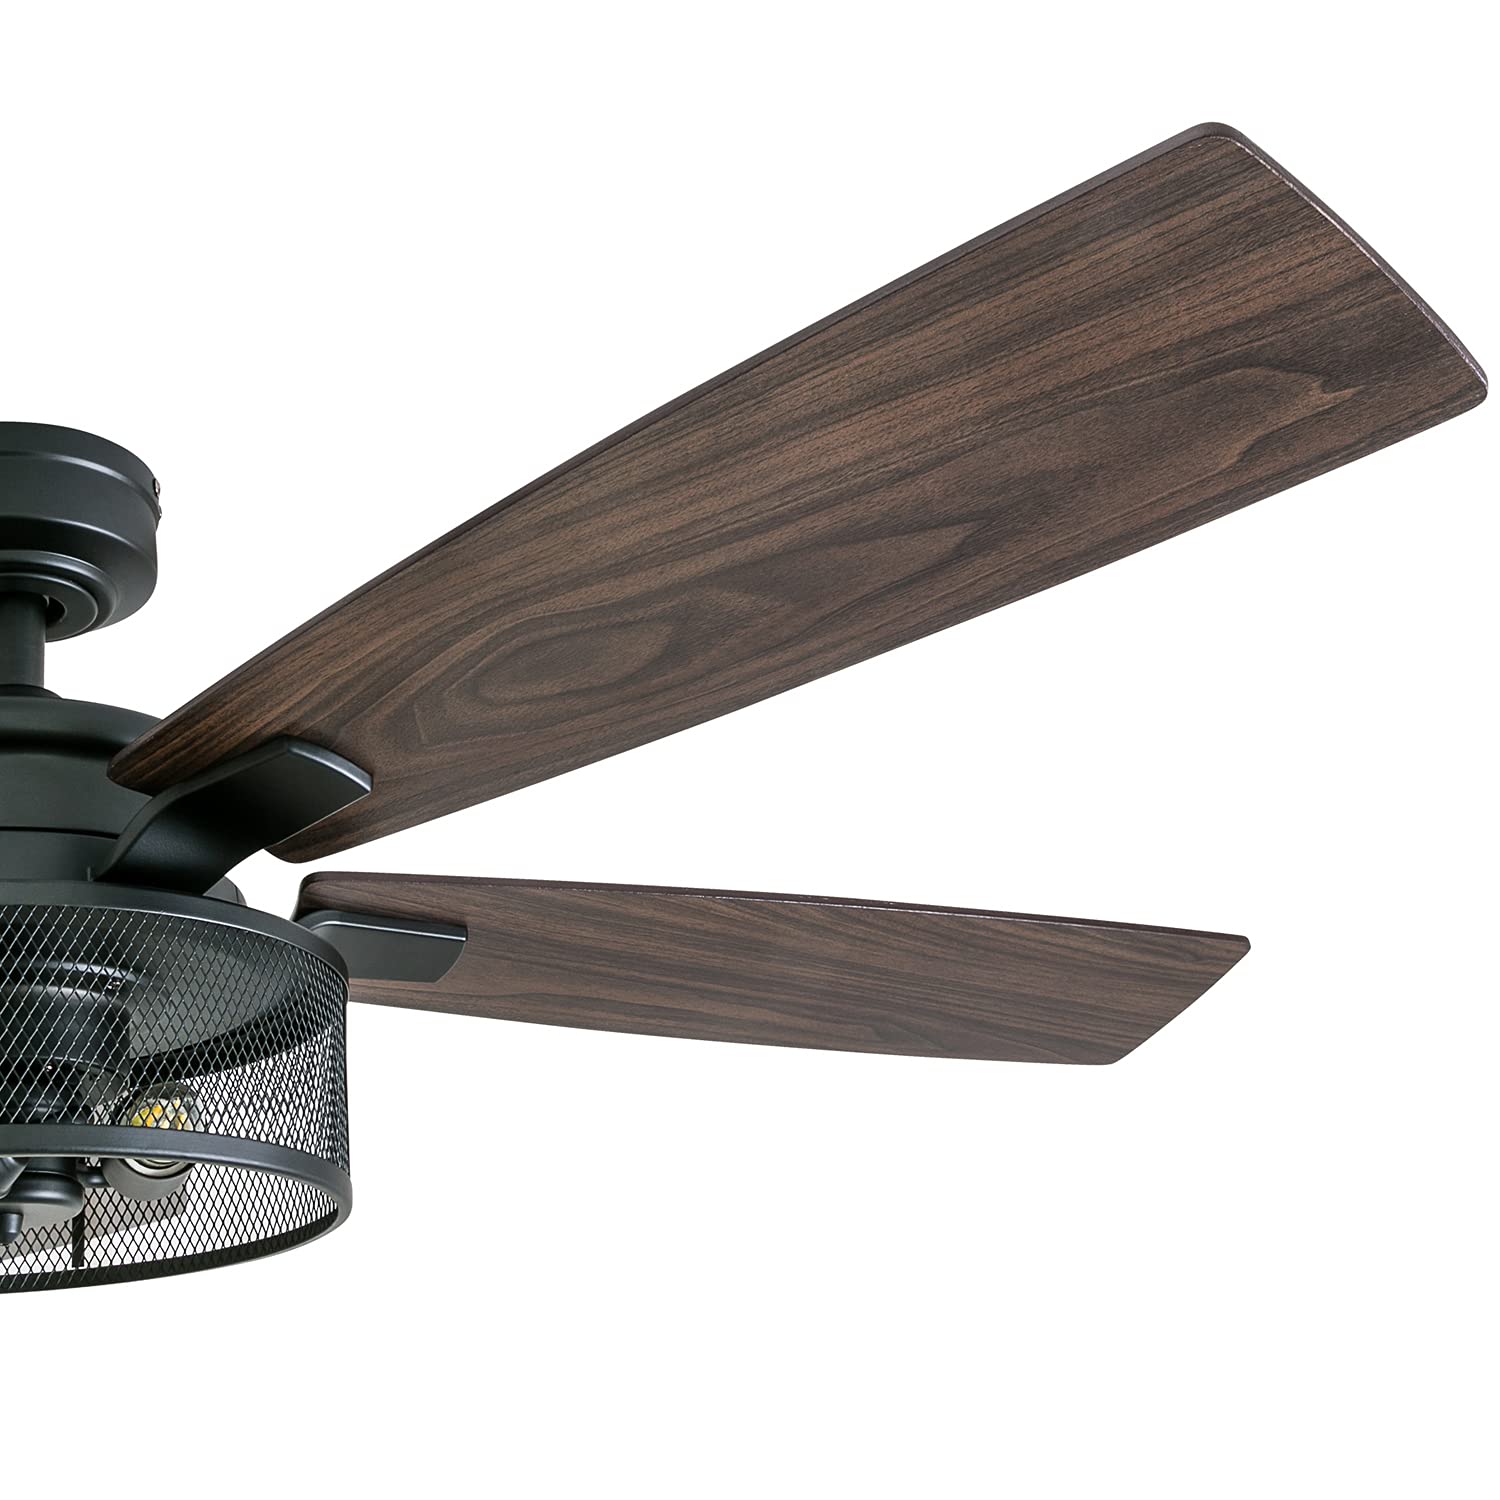 Honeywell Ceiling Fans Carnegie, 52 Inch Industrial LED Ceiling Fan with Light and Remote Control, Dual Mounting Options, Dual Finish Blades, Reversible Motor - 50614-01 - (Matte Black)